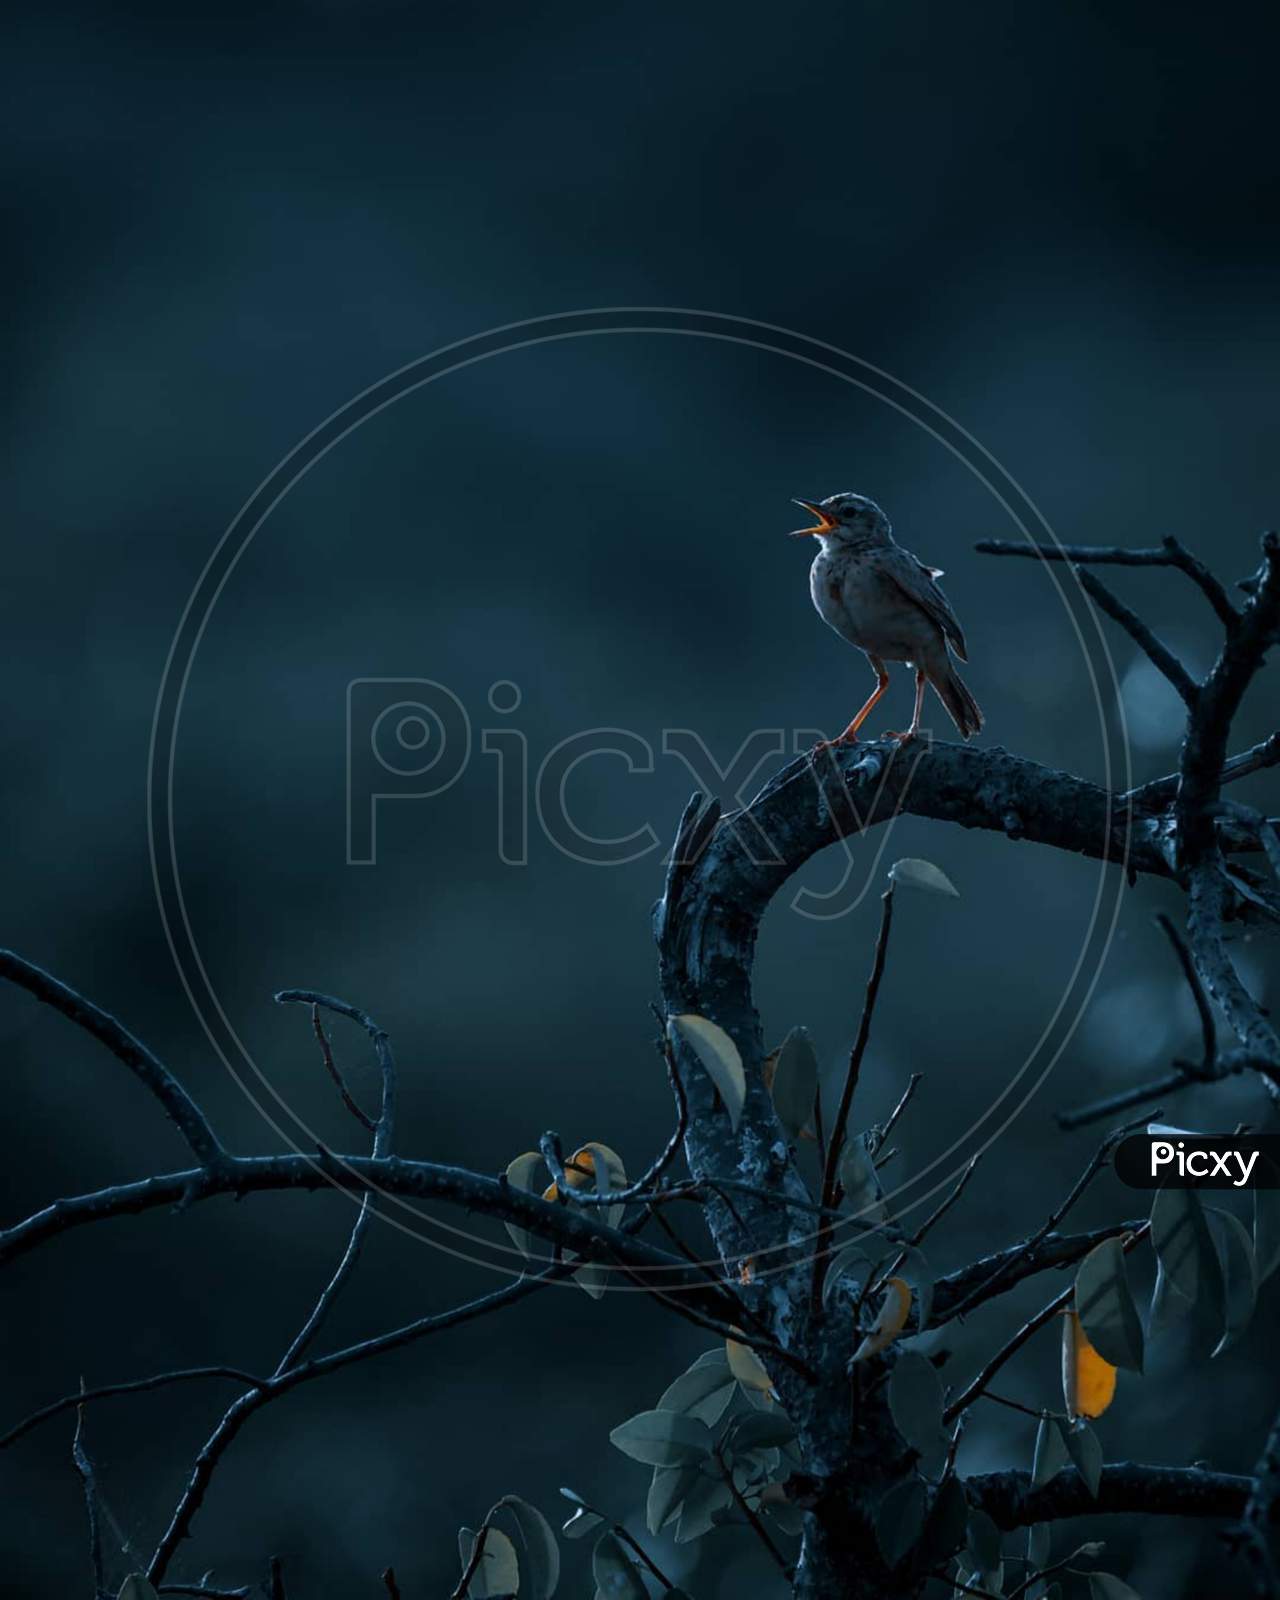 A bird is sitting on a tree